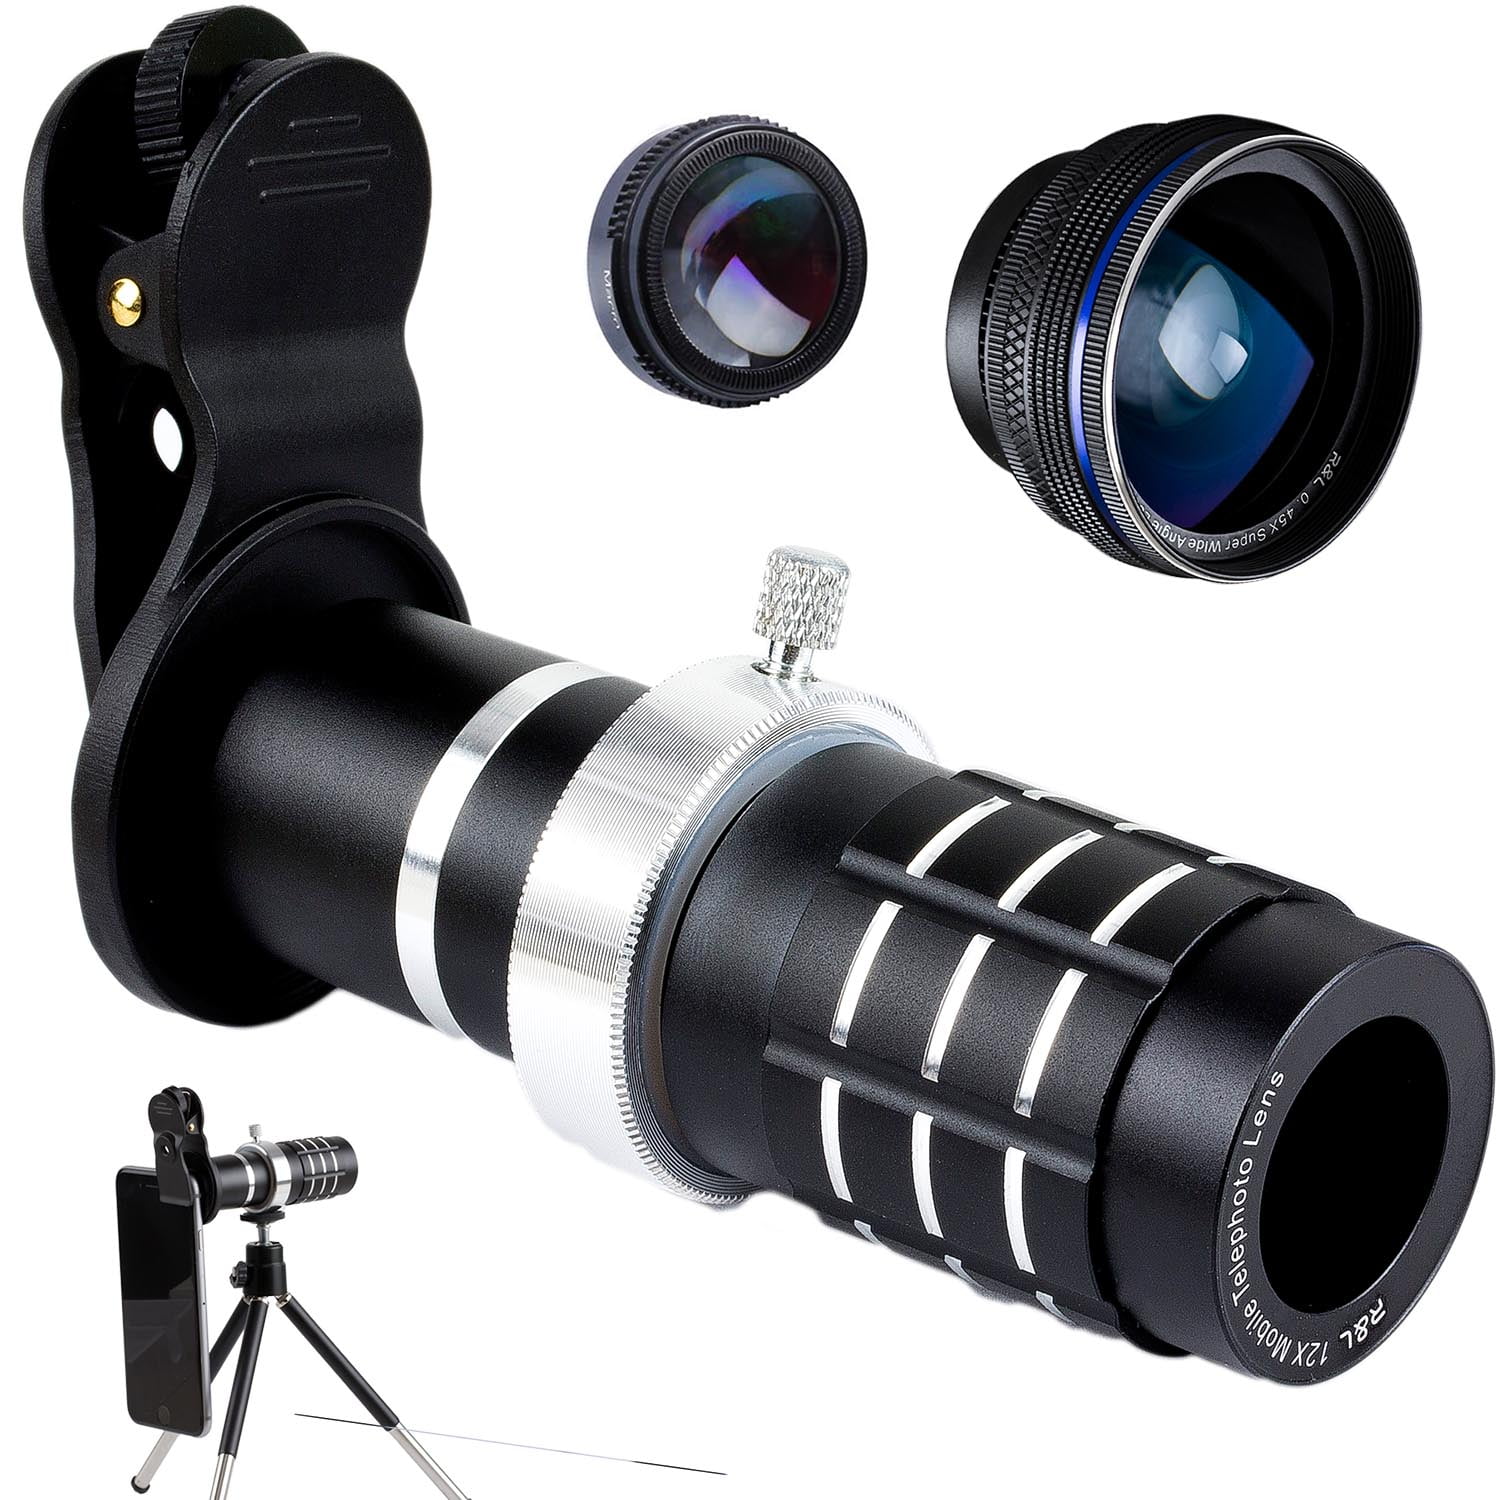 Smartphone Camera Fisheye Lens HD Macro Lens Wide Angle Lens with Tripod Compact Monocular for Bird Watching/Concert Travel 95 100x90 Monocular Telescope Cell Phone Lens Kit A 